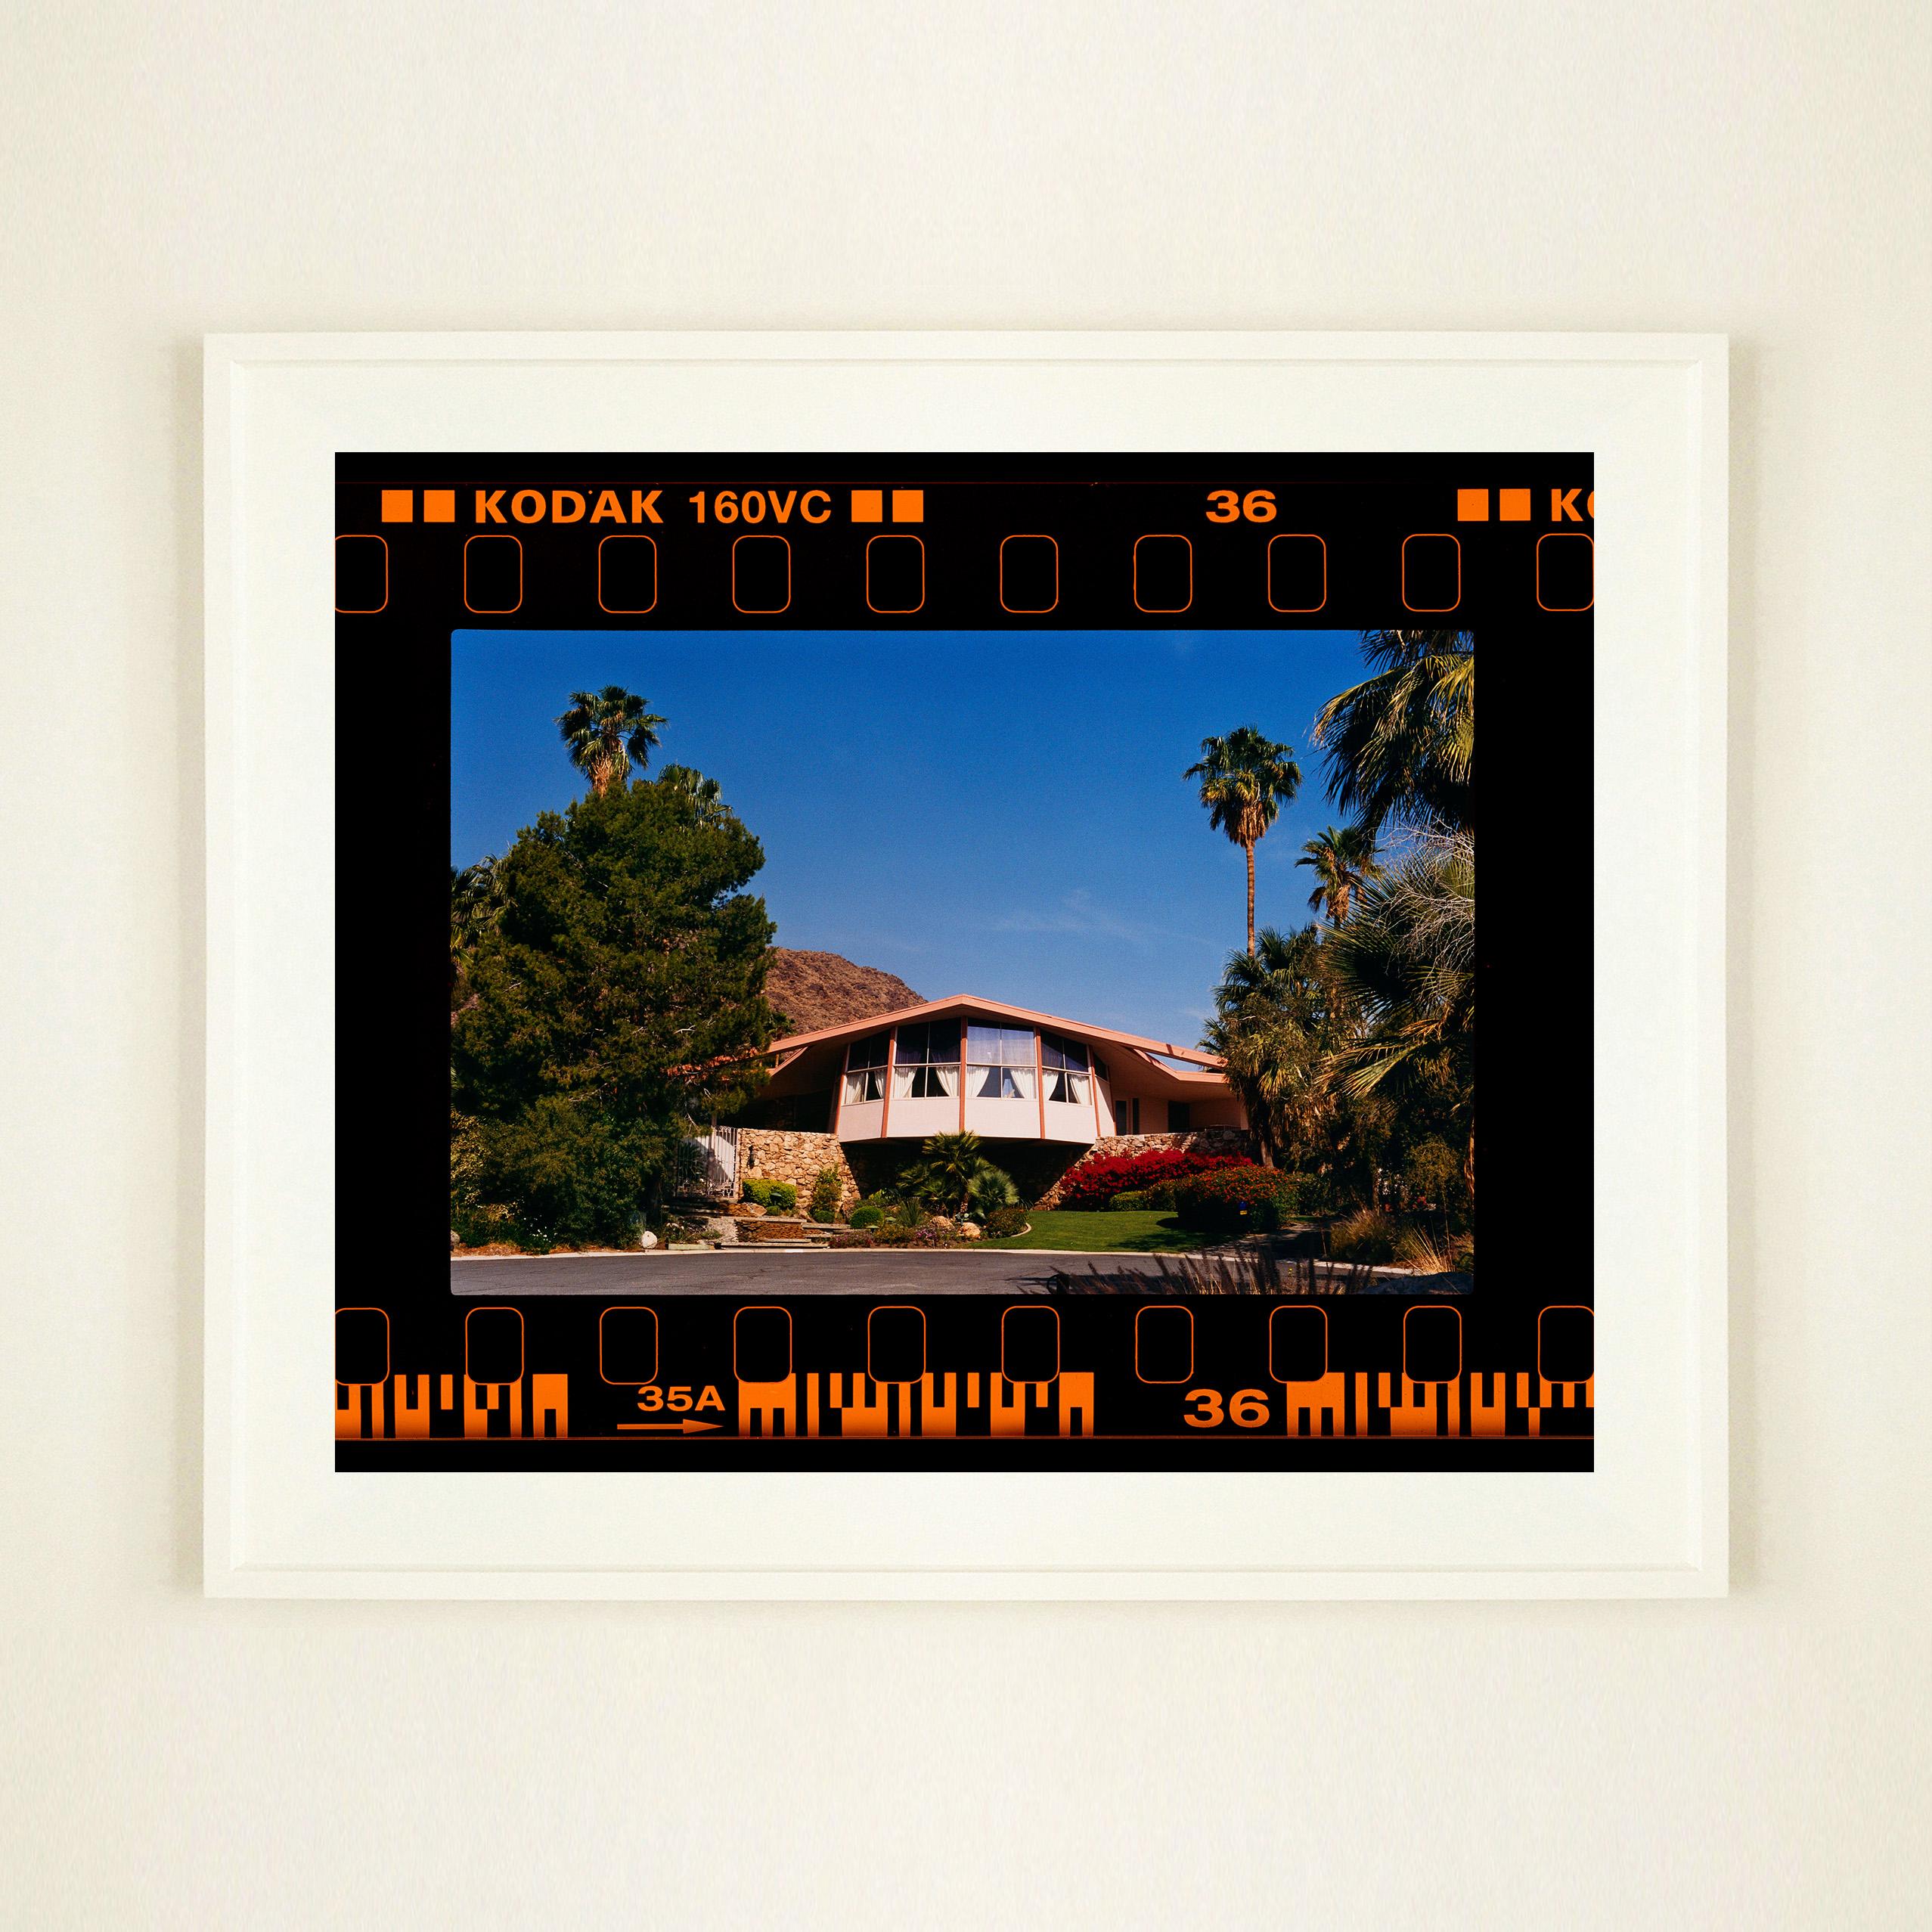 Honeymoon Hideaway, Palm Springs California - Mid-century architecture photo - Contemporary Print by Richard Heeps